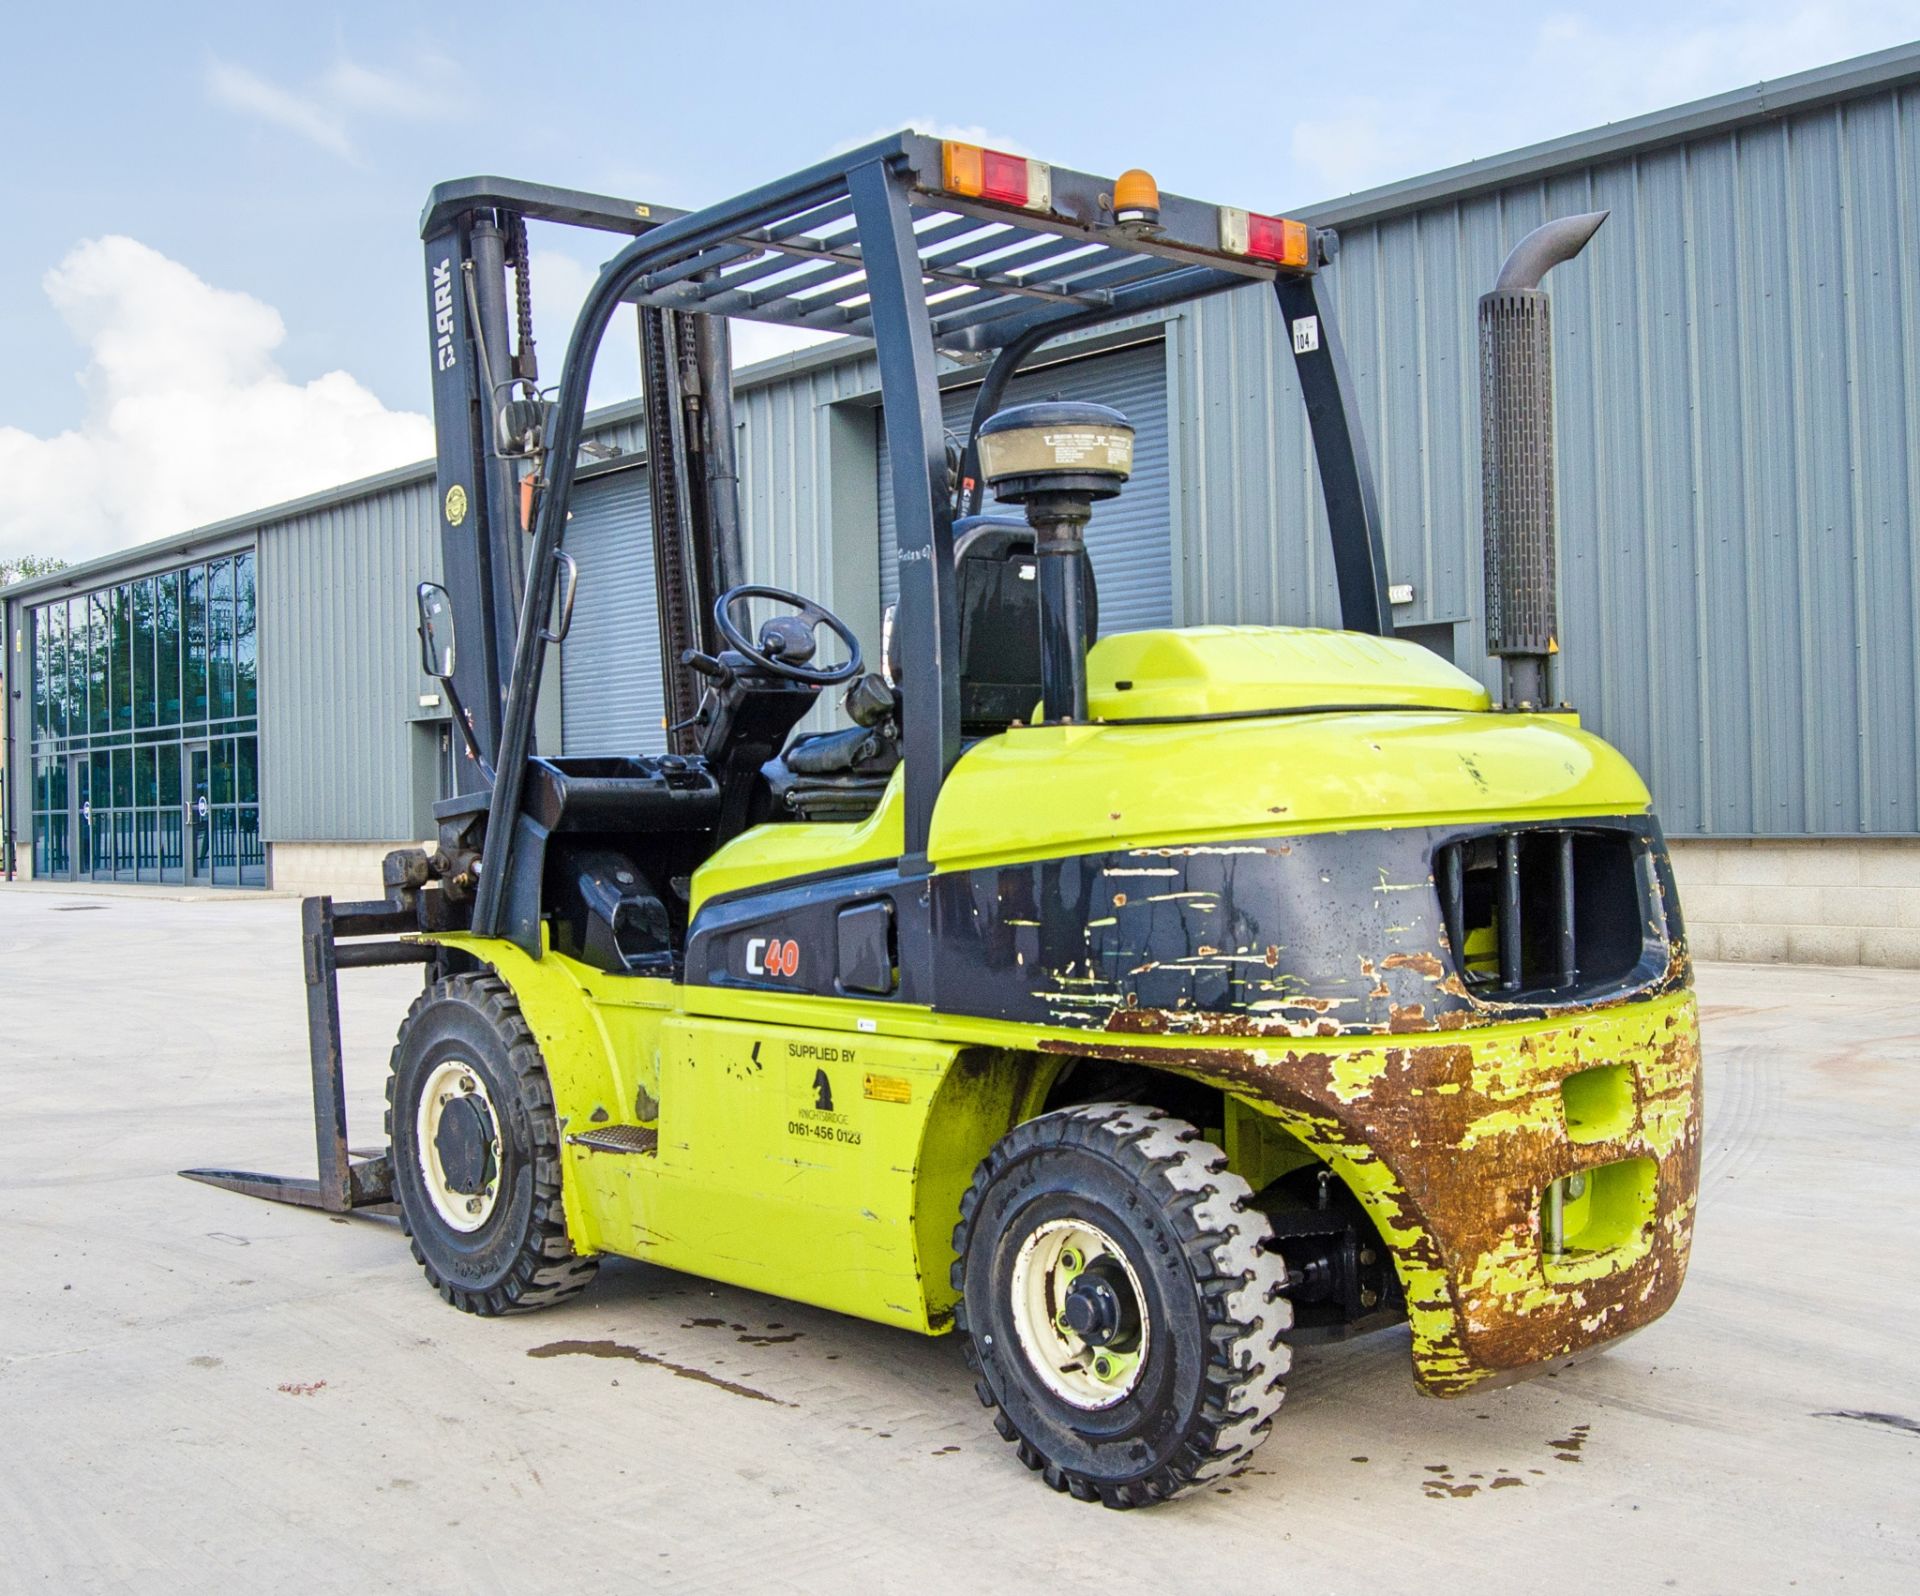 Clark C40D 4 tonne diesel driven fork lift truck Year: 2014 S/N: 9913 Recorded Hours: 4484 N628404 - Image 4 of 21